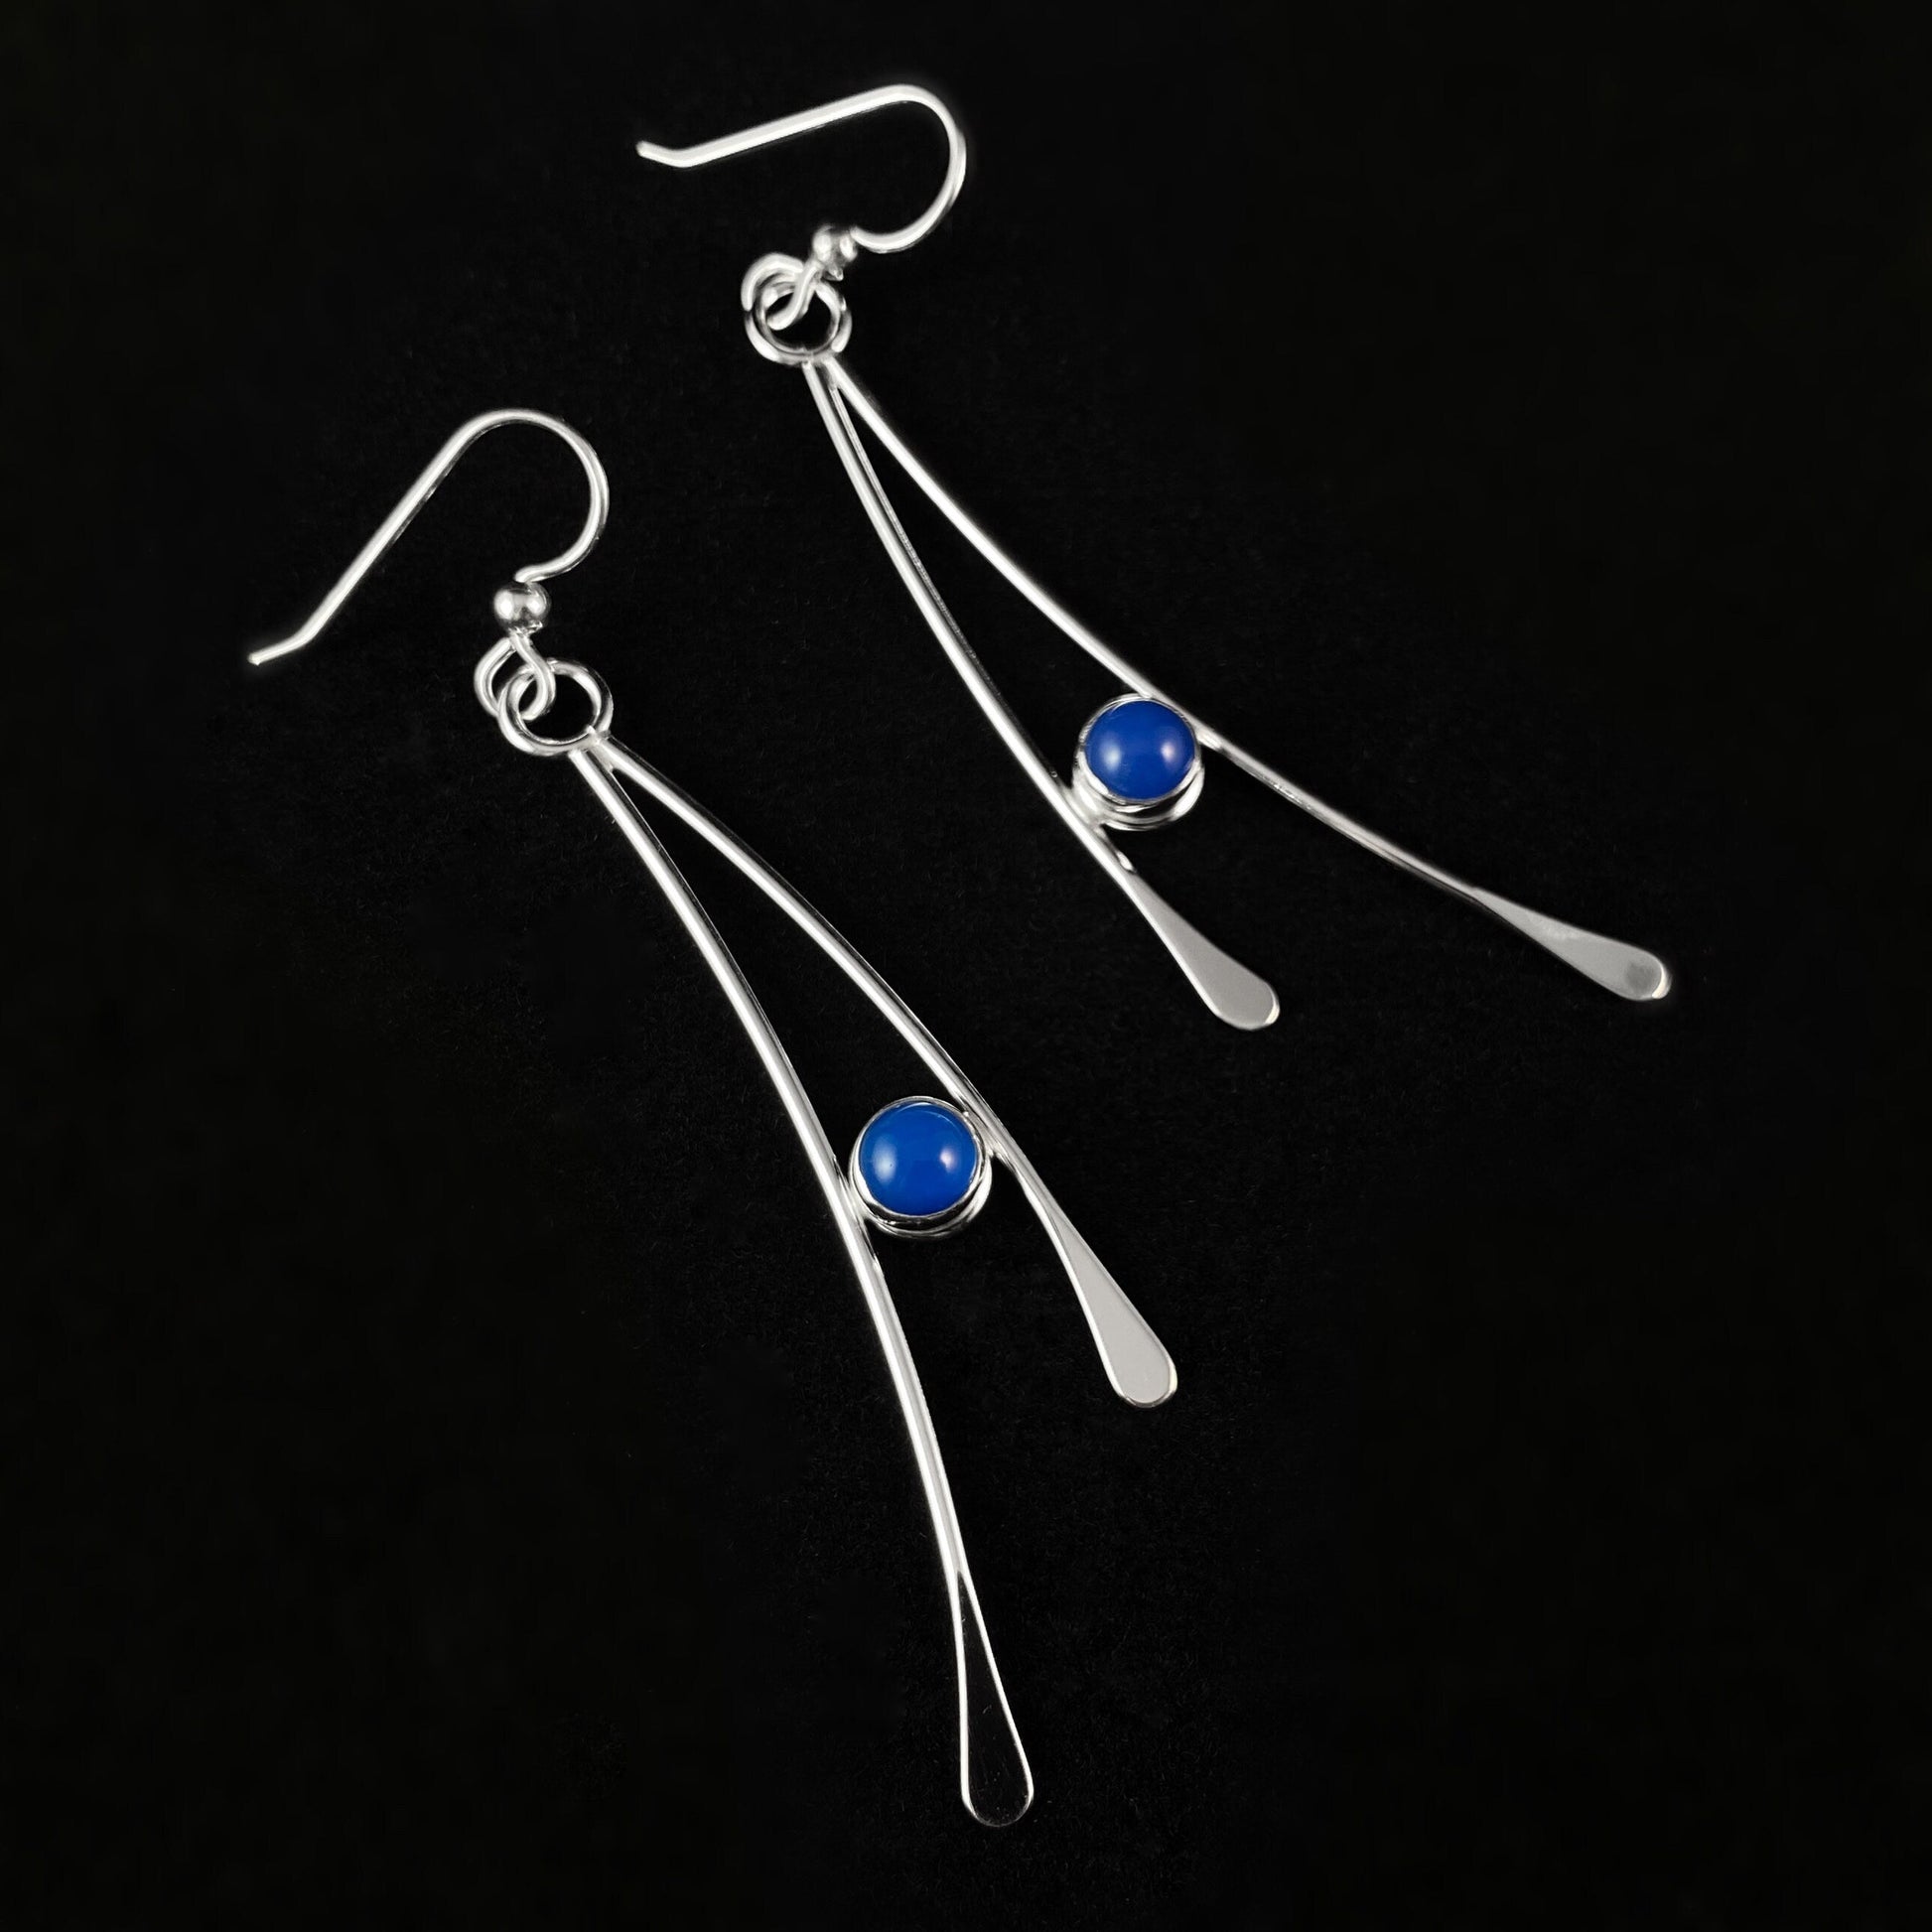 Handmade Sterling Silver Dancing Blue Stone Earrings, Made in USA - Reflections